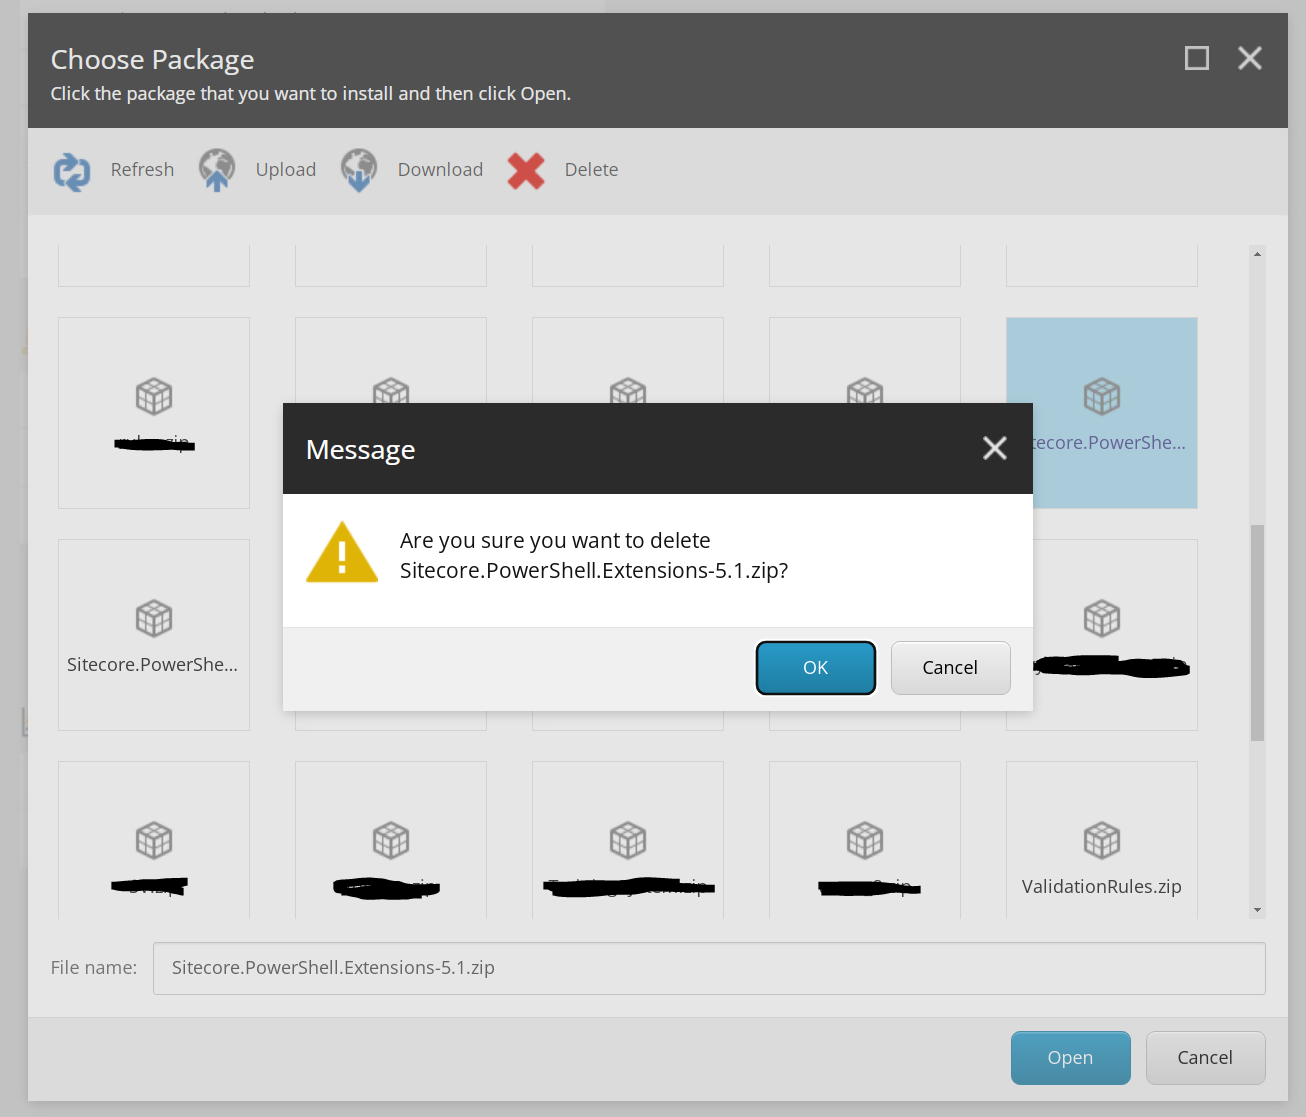 Confirm you want to delete the package in Sitecore